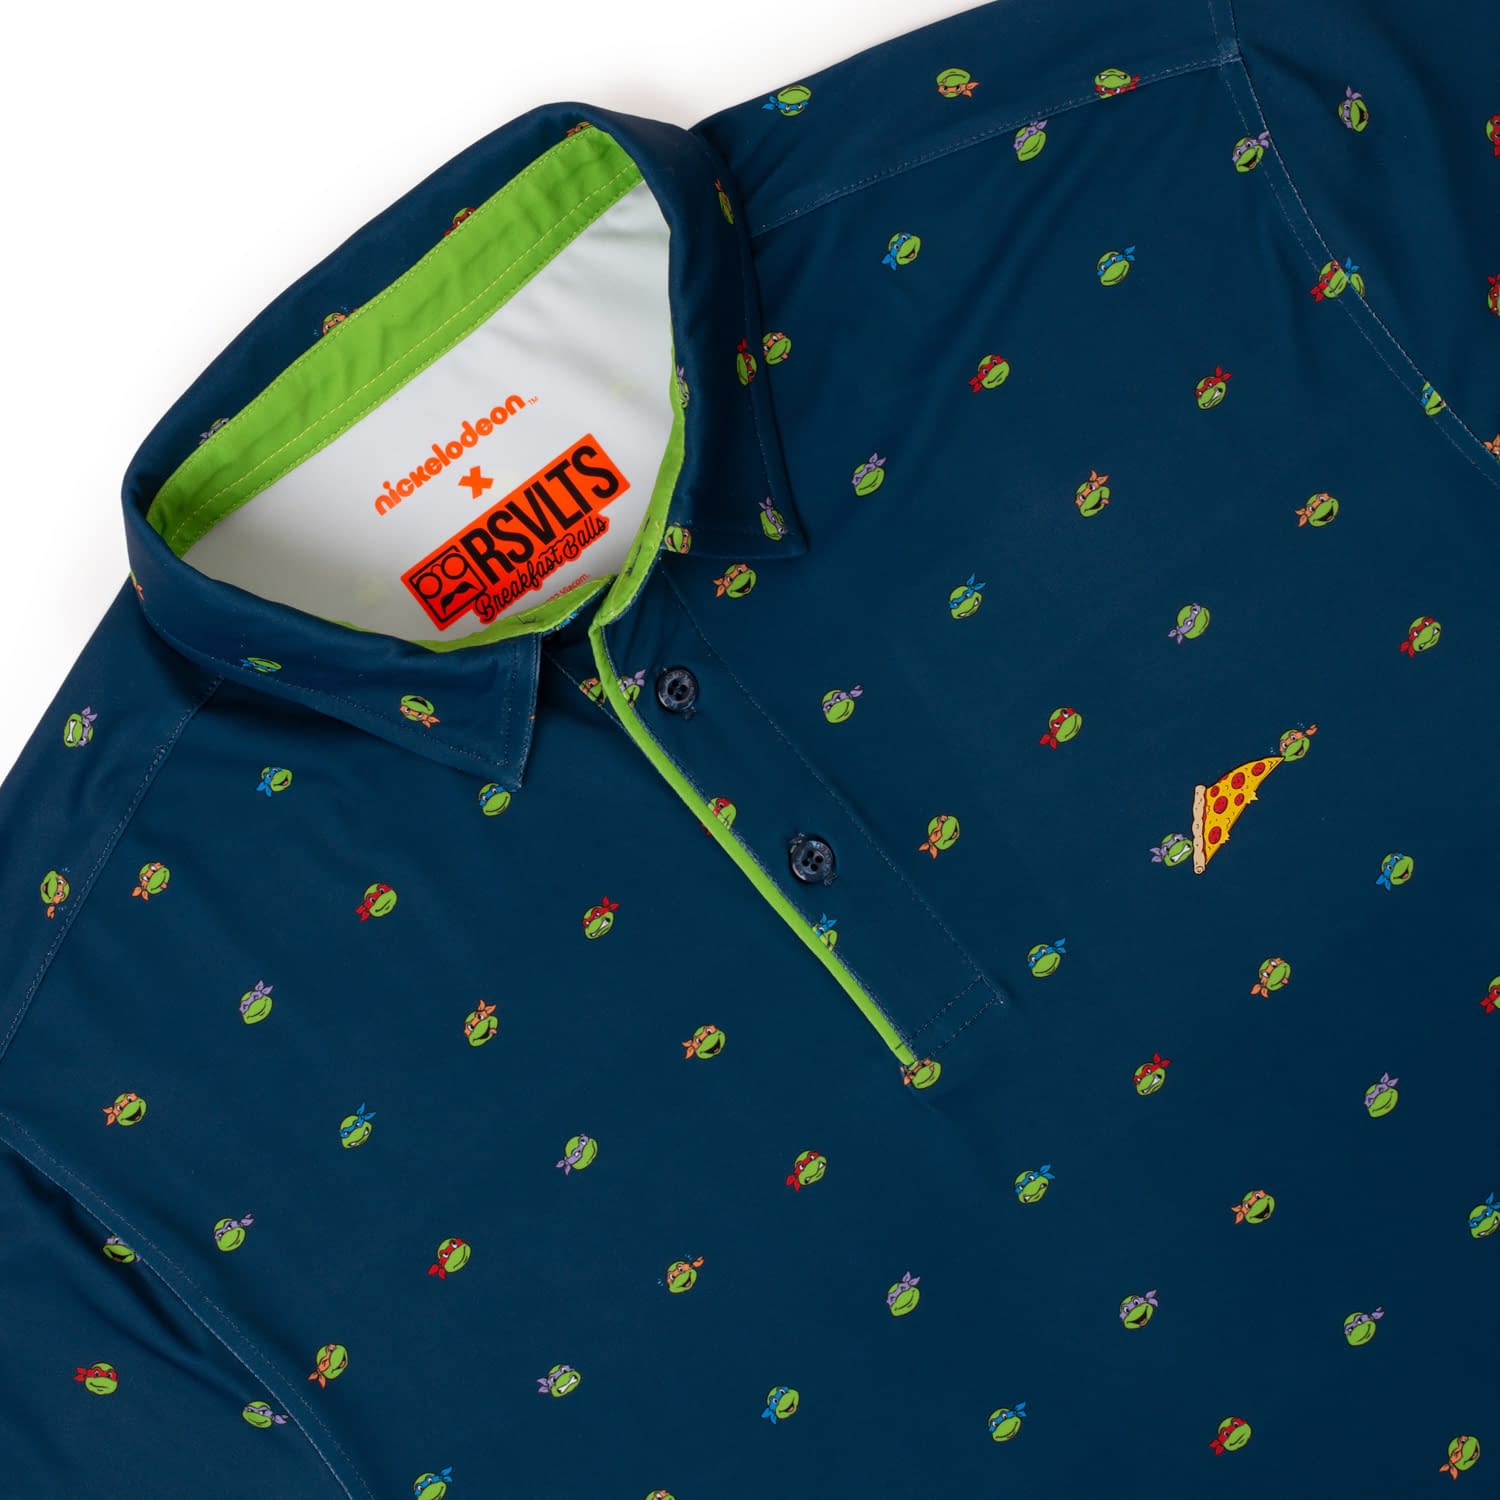 RSVLTS Debuts First-to-Market TMNT Polo at NYCC 2022